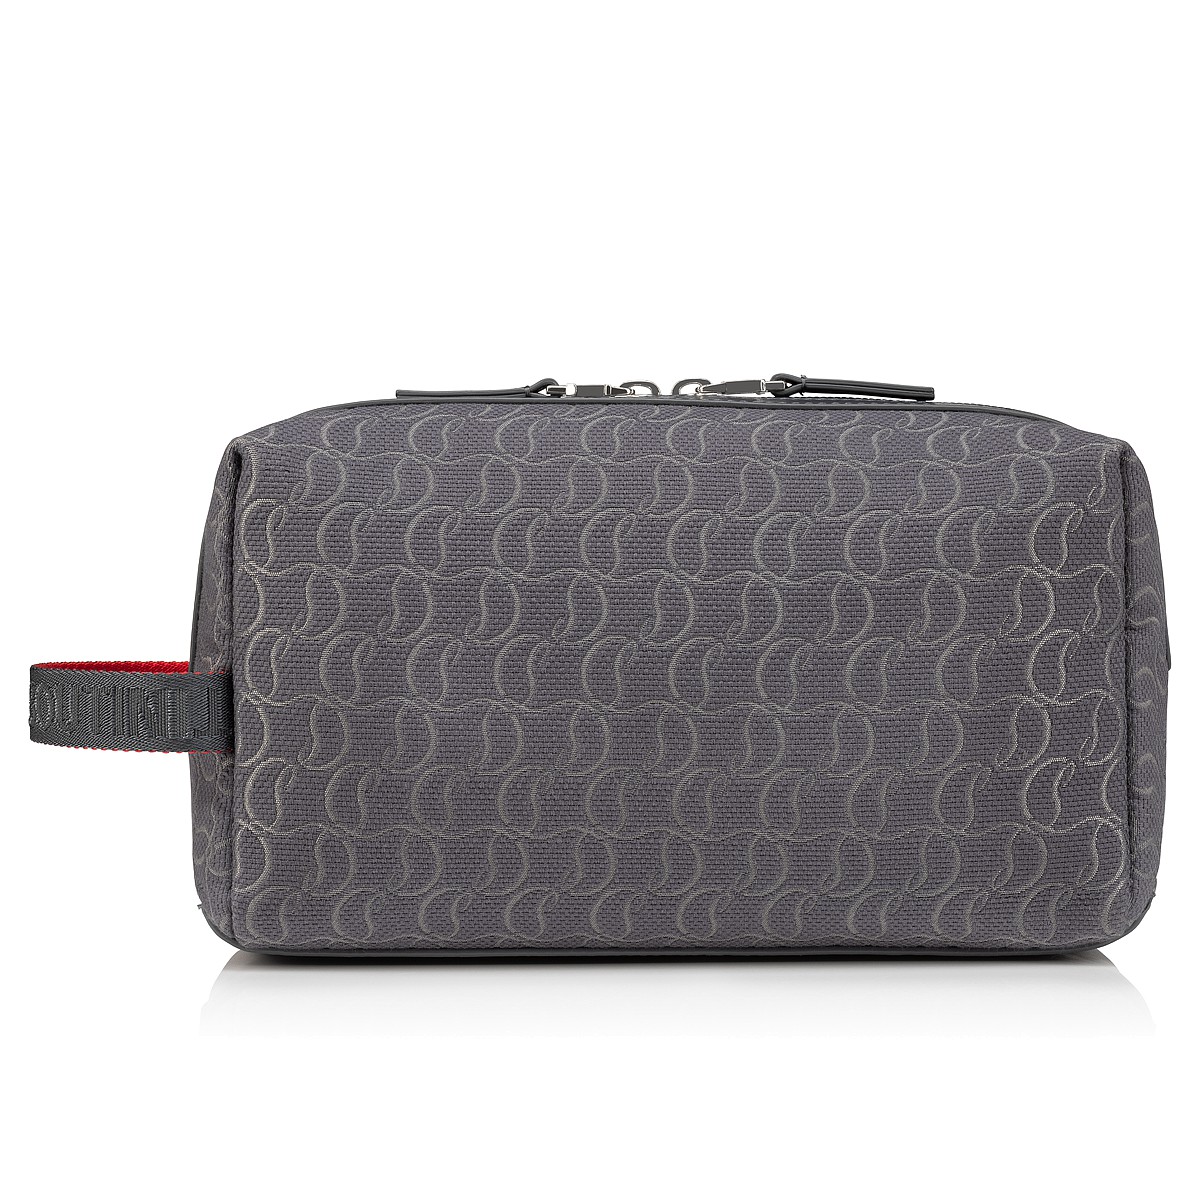 Small Leather Goods - Zip N Flap - Christian Louboutin